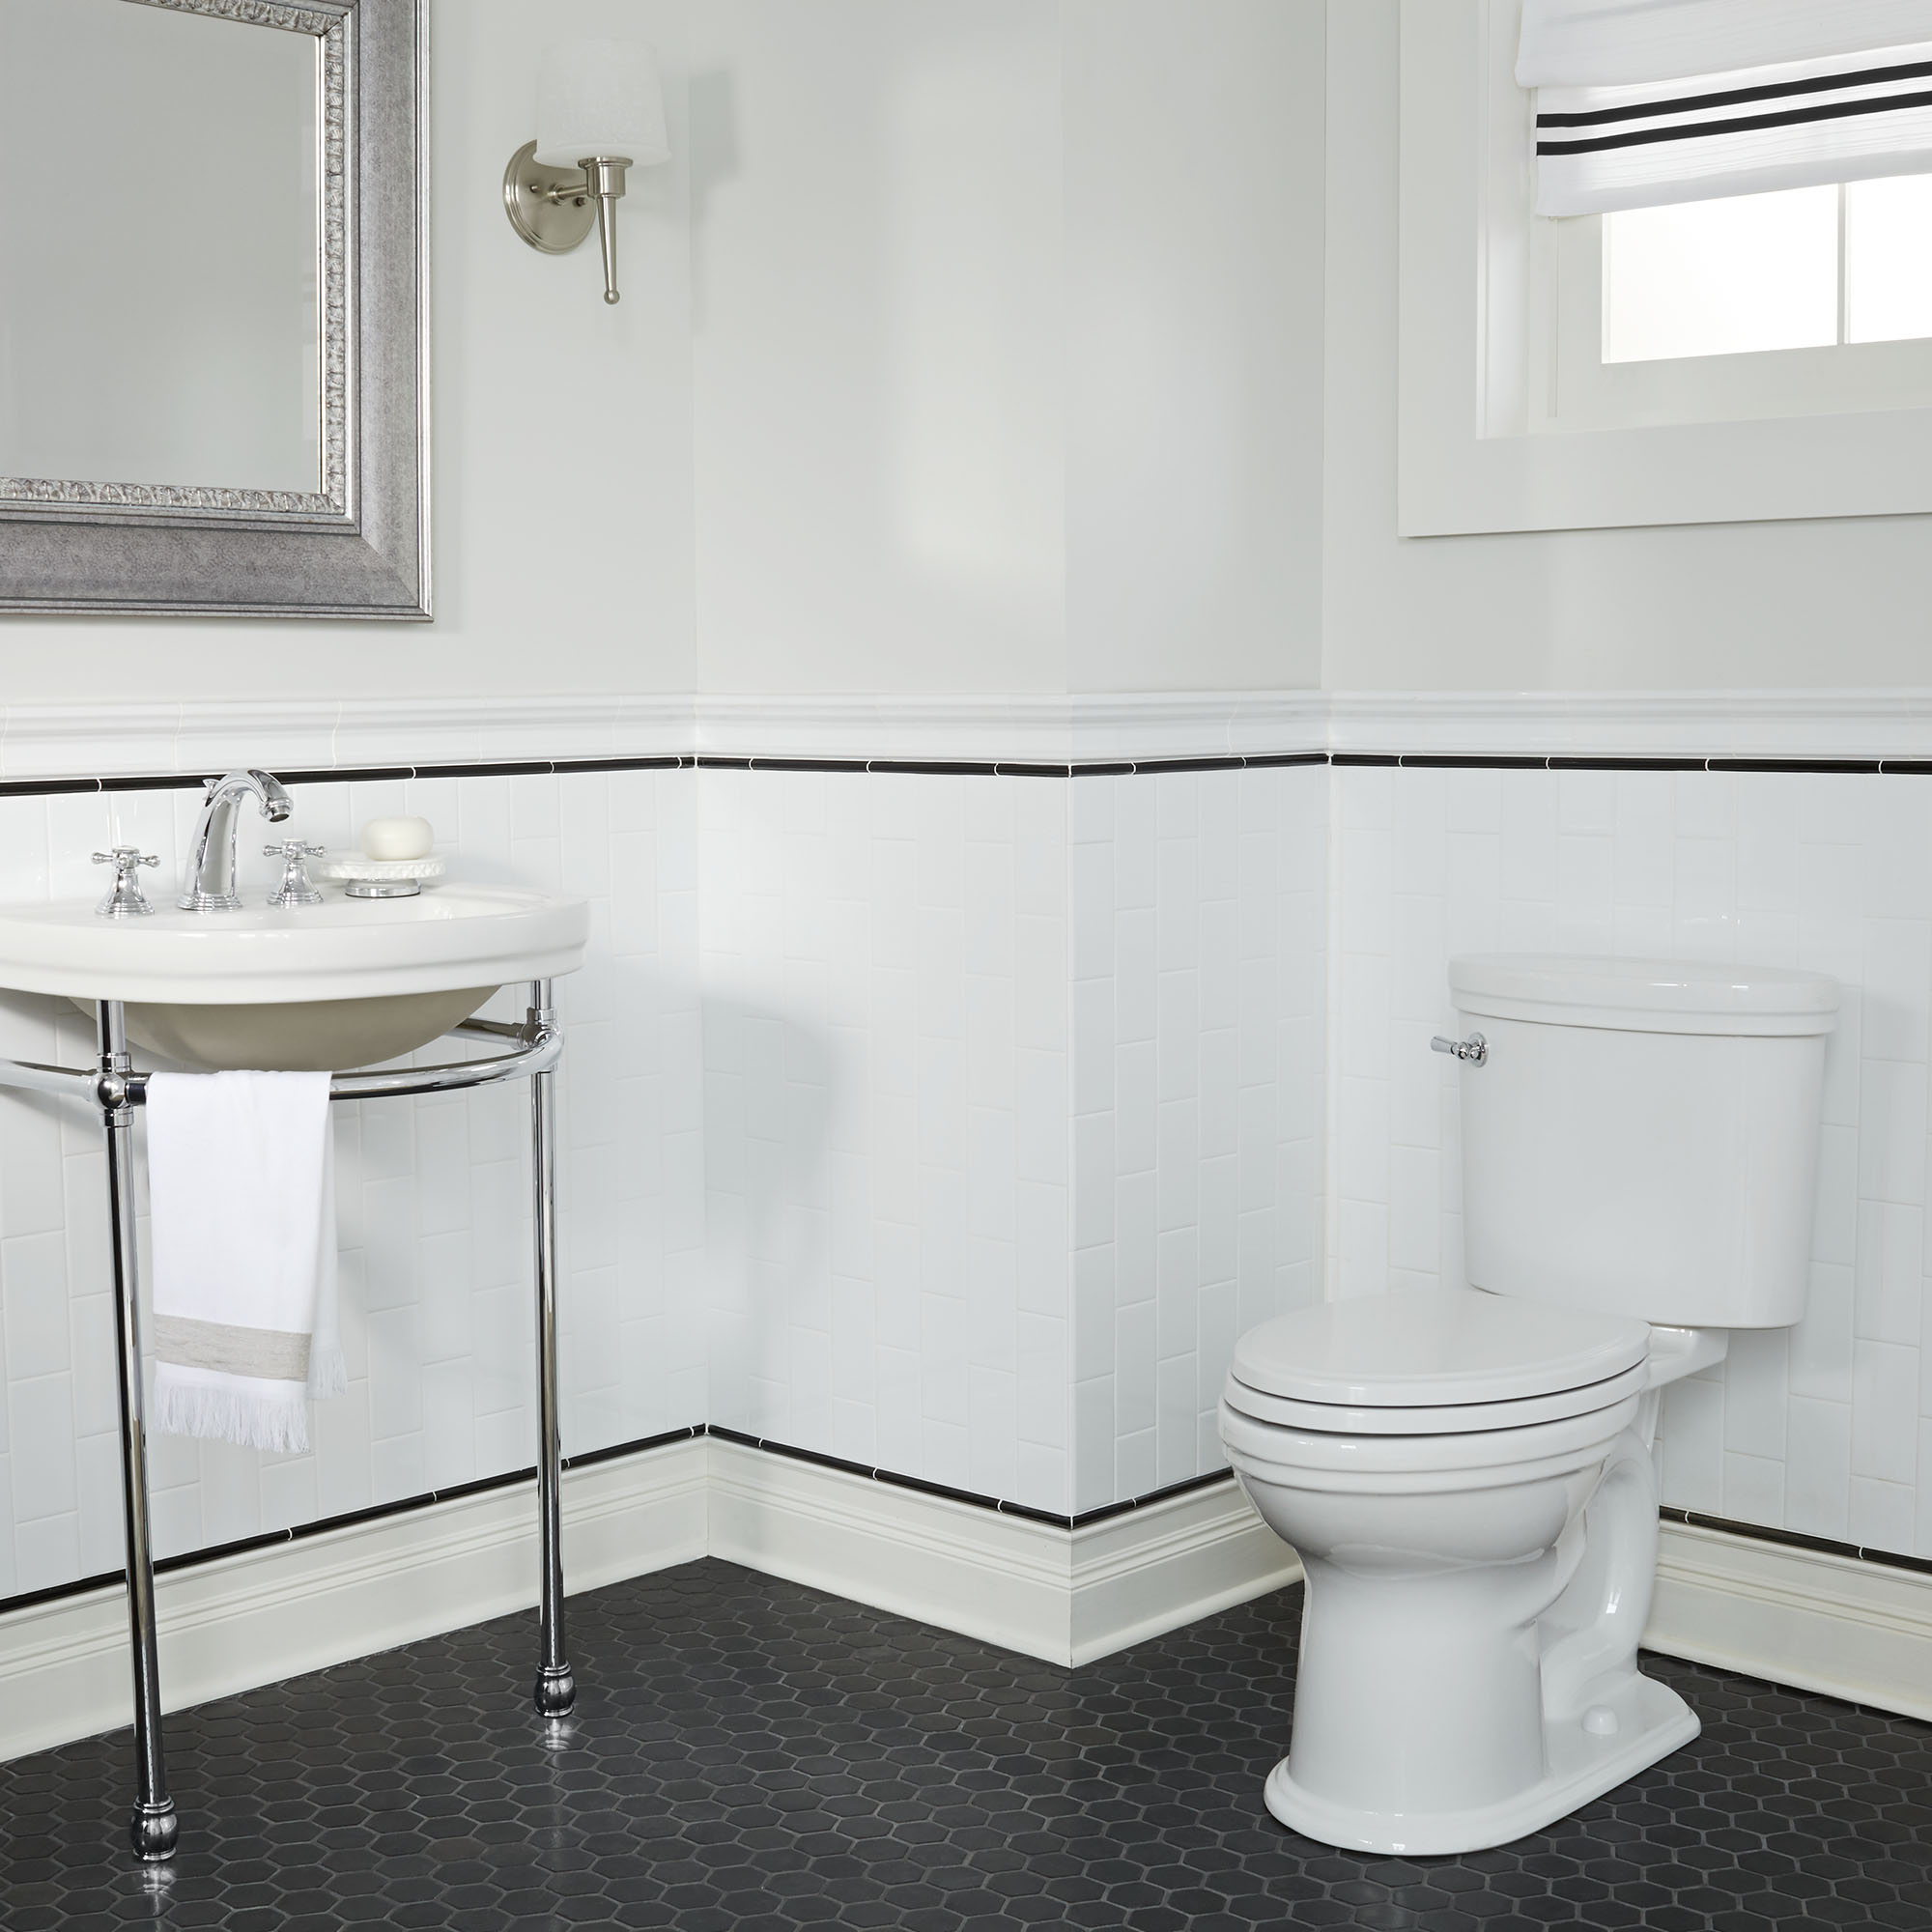 St. George Two-Piece Chair Height Elongated Toilet with Seat